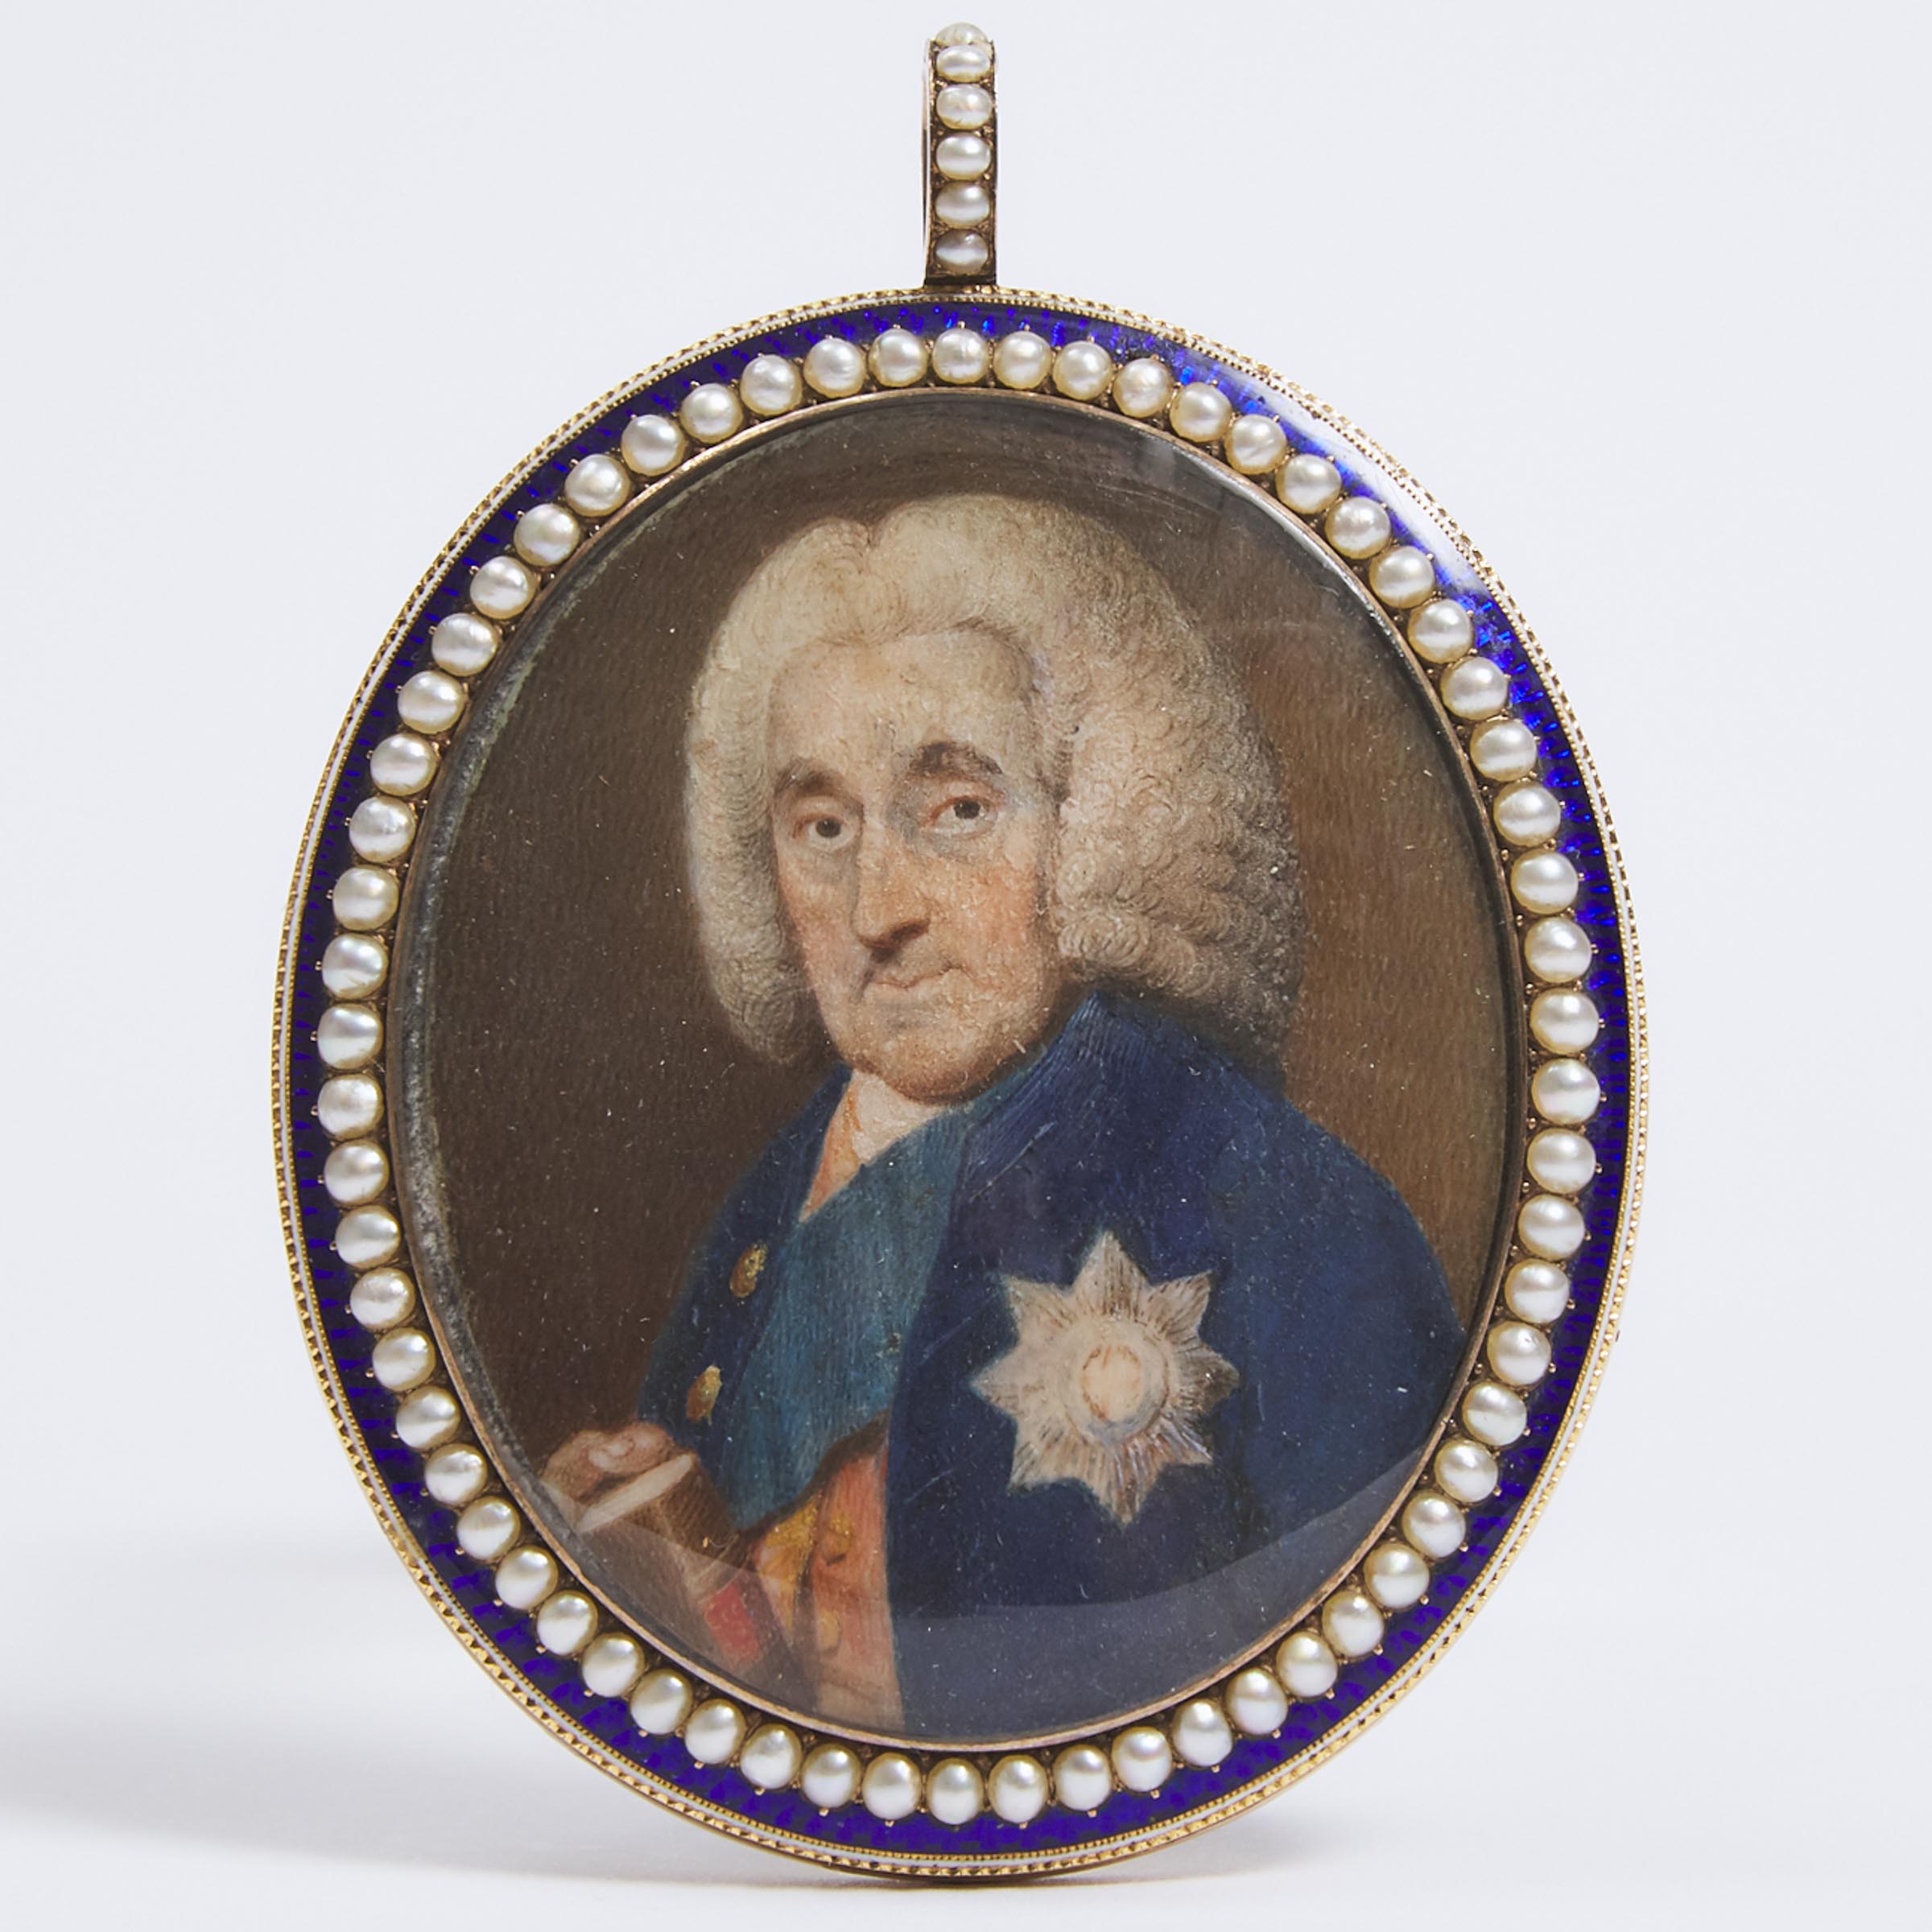 Portrait Miniature of Philip Stanhope, 4th Earl of Chesterfield, after Gainsborough, c.1770